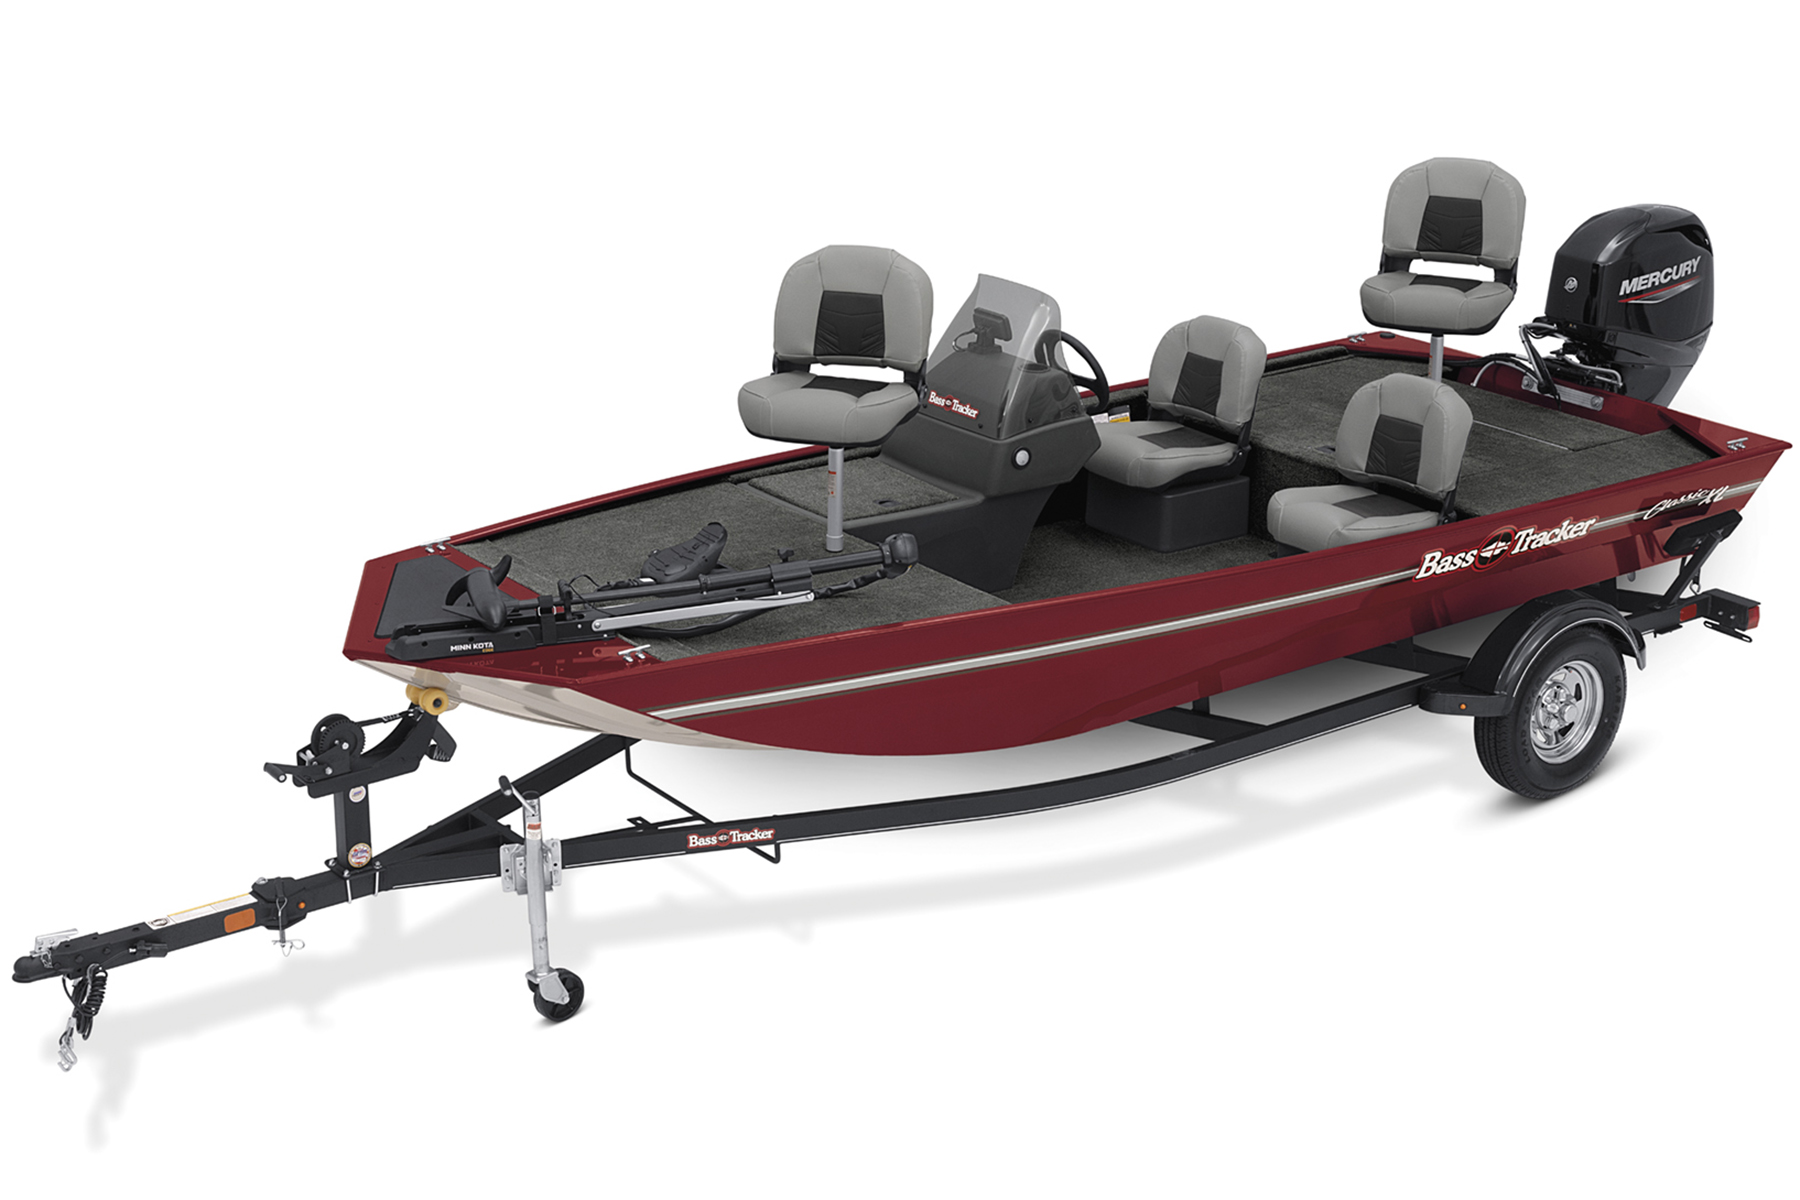 Bass Boat Saver Reviews - Total Protection For Your Entire Boat